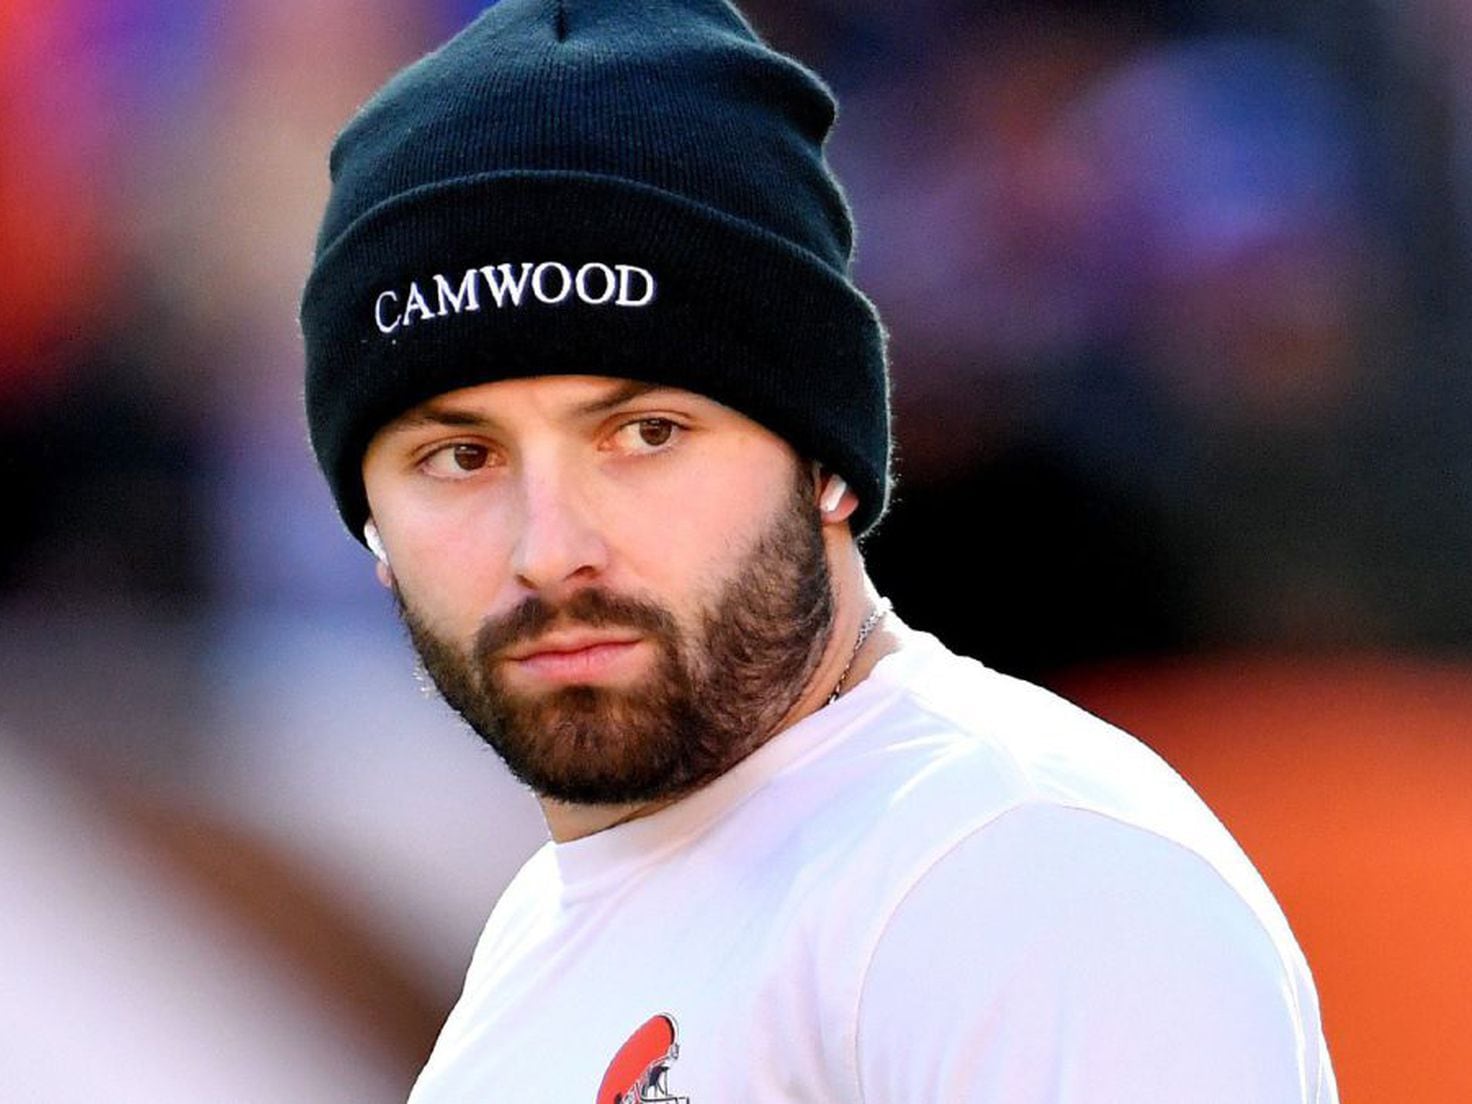 Carolina Panthers trade for QB Baker Mayfield to compete for starting job